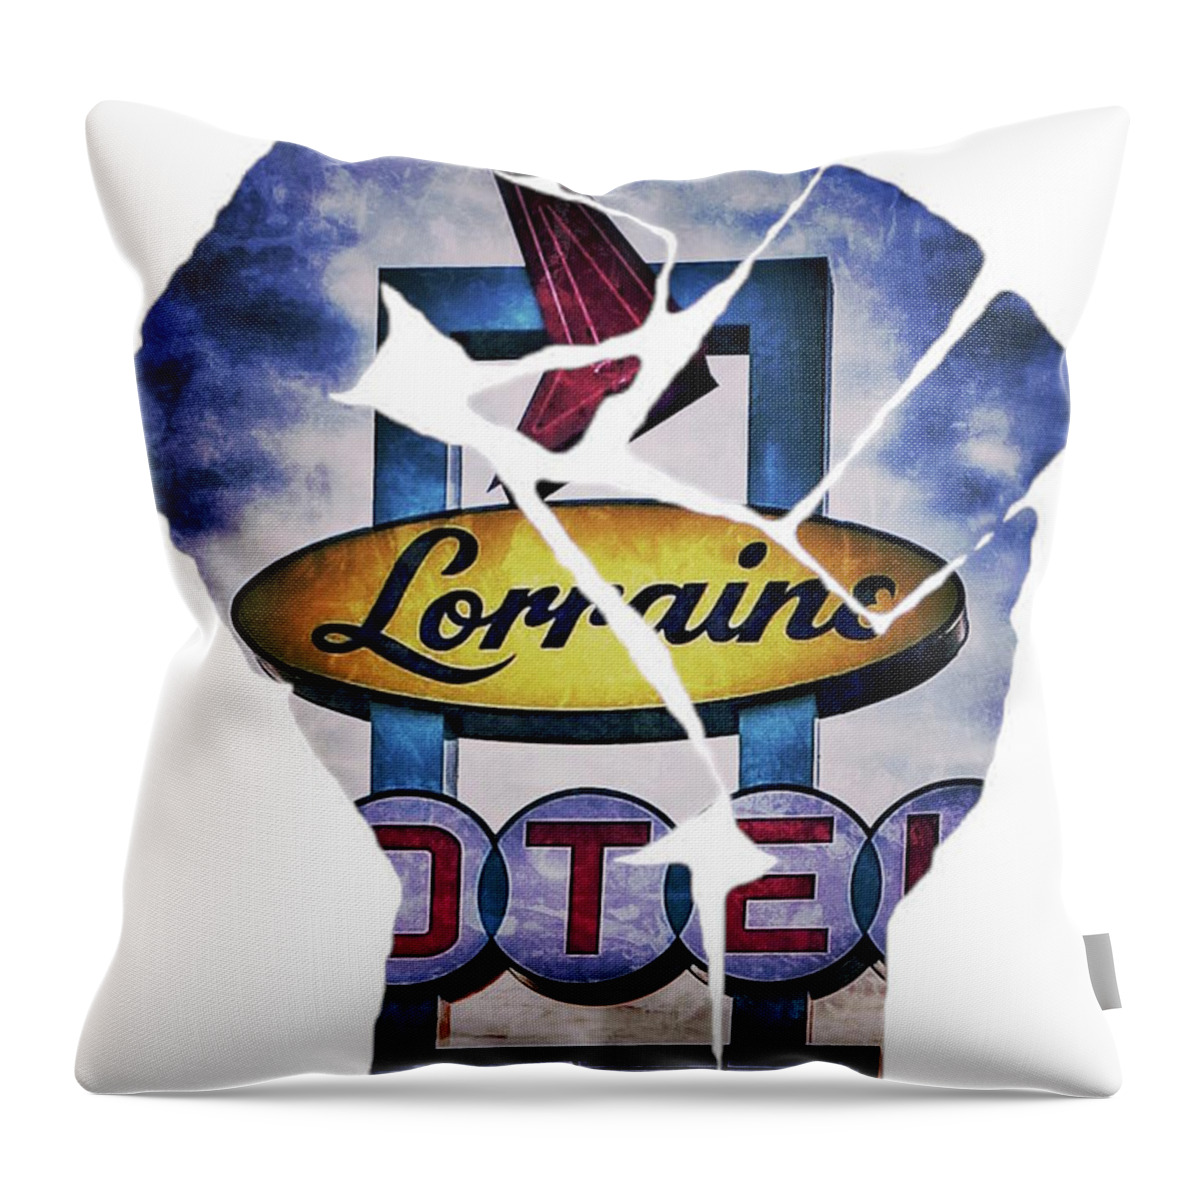  Throw Pillow featuring the photograph Lorraine Motel by Al Harden